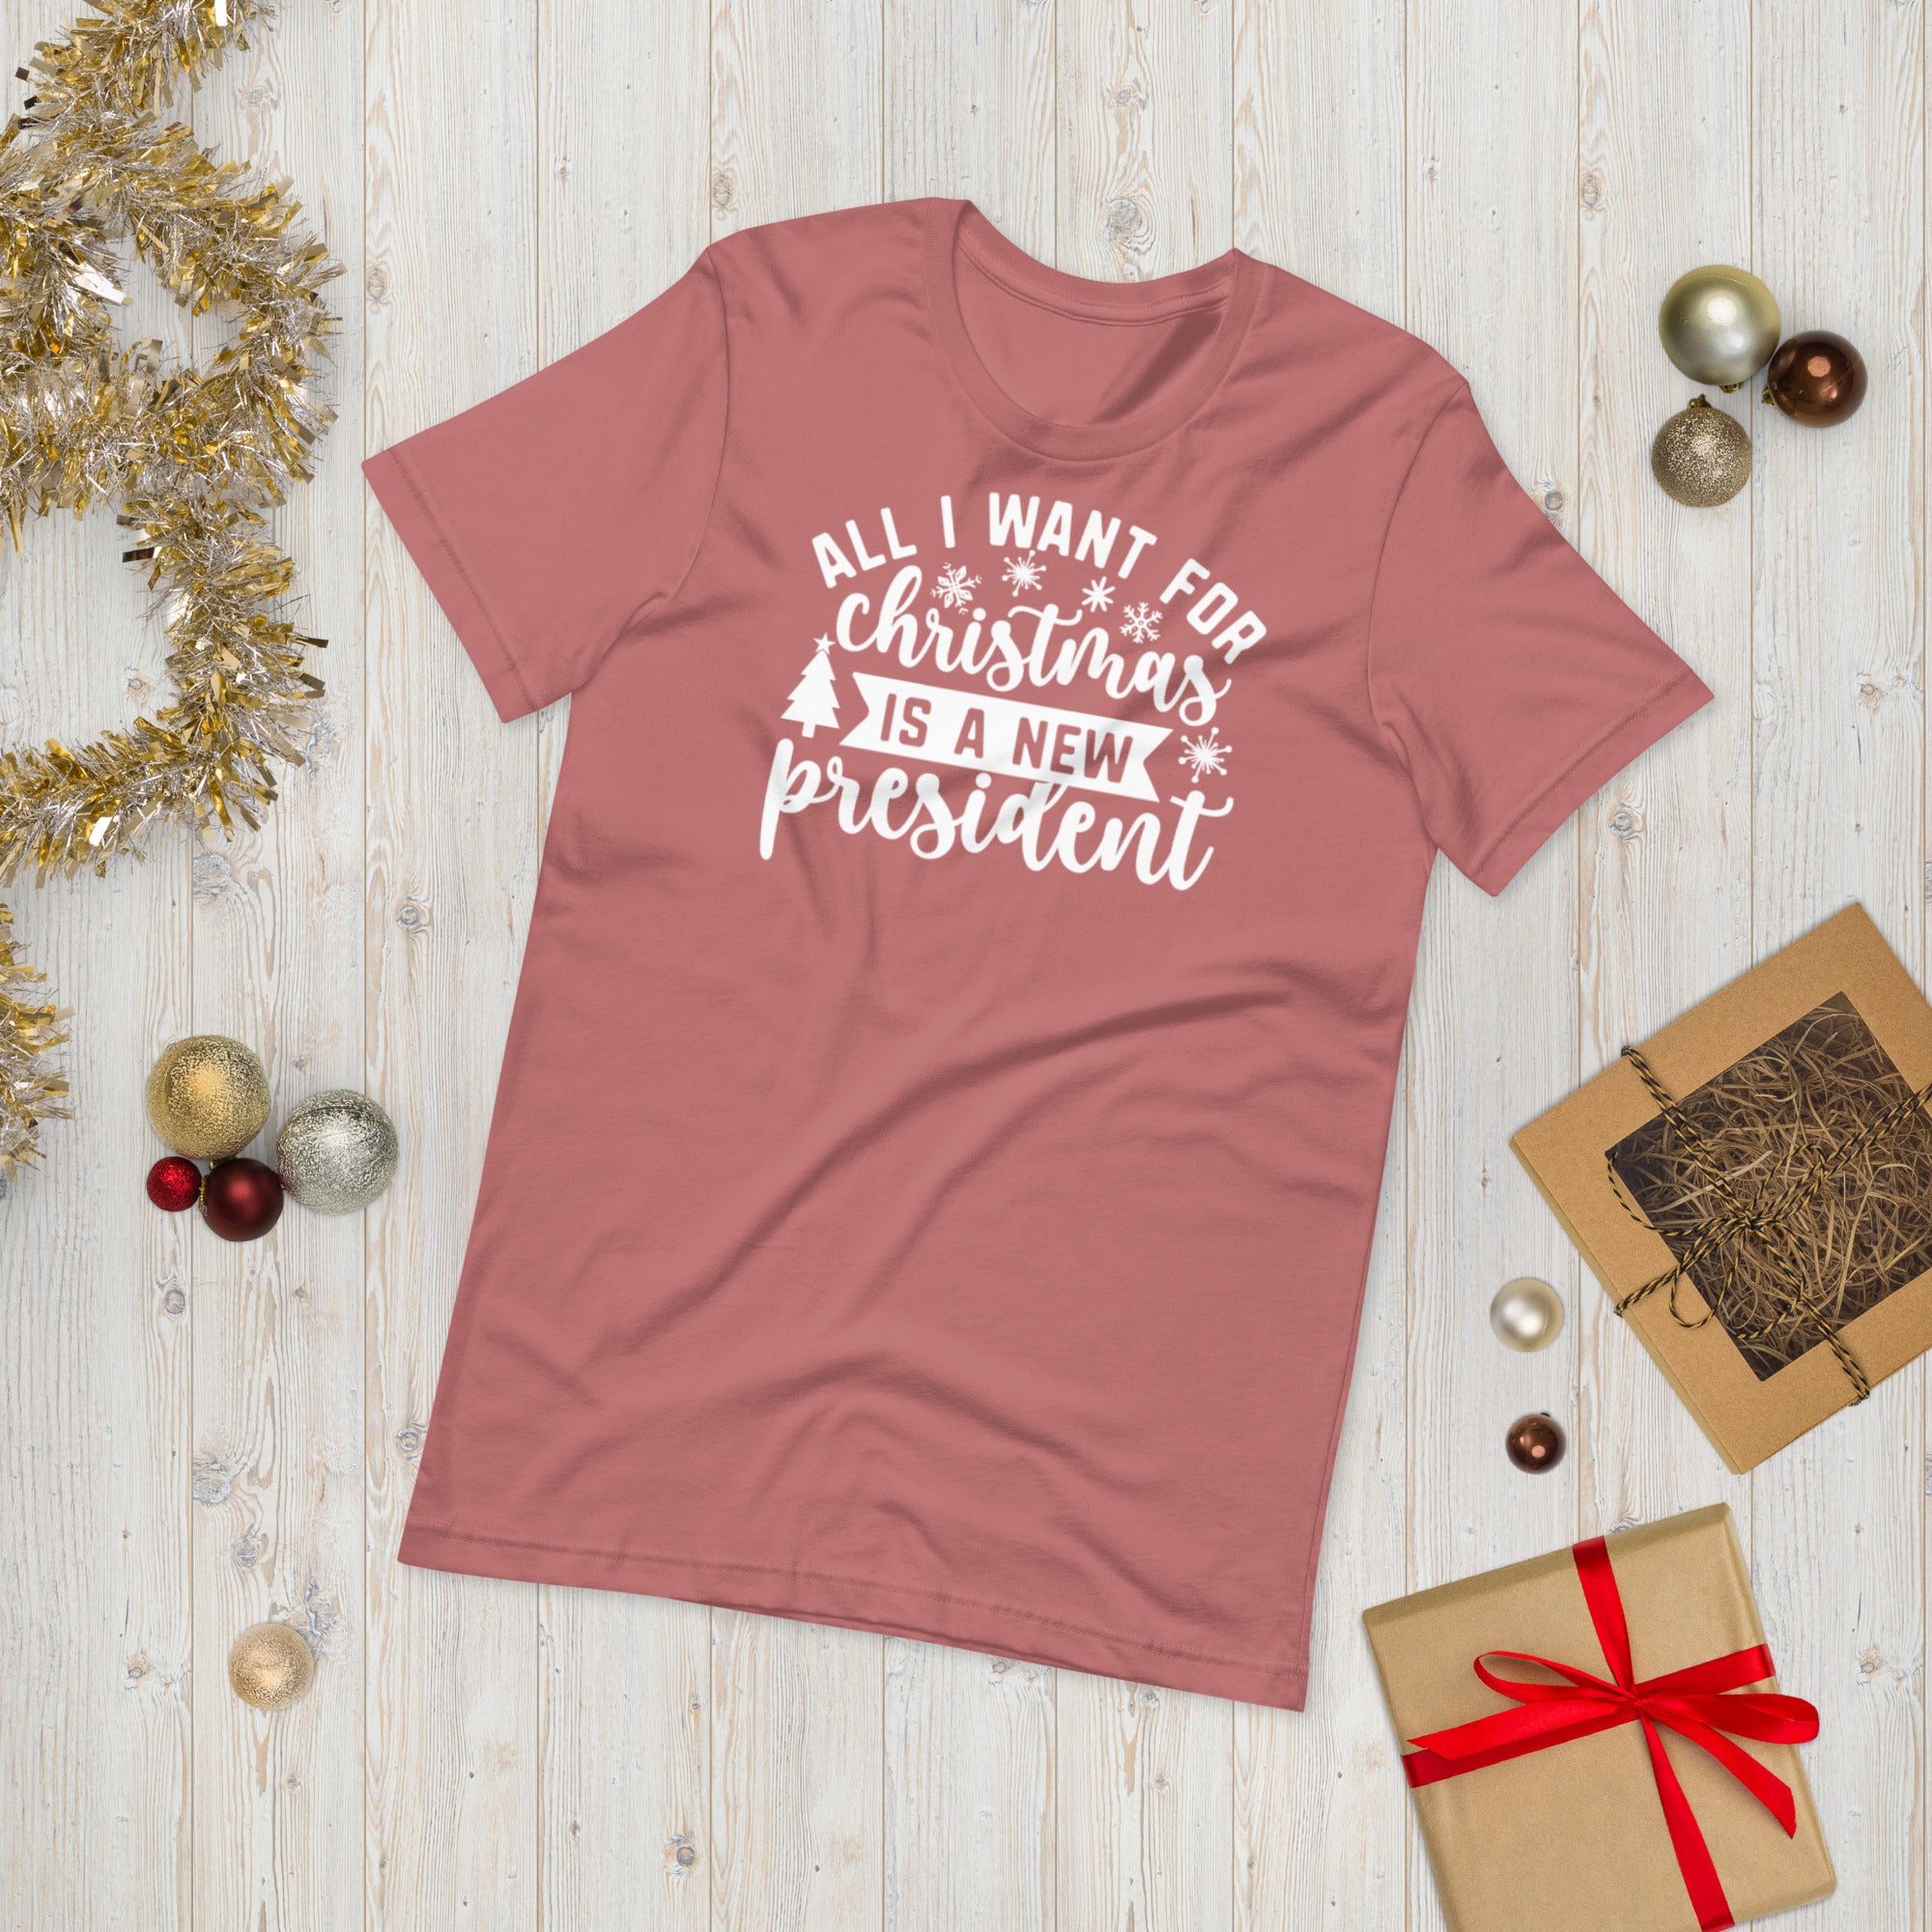 All I Want For Christmas Is A New President Shirt, FJB Christmas Shirt, Christmas Gifts, Anti Biden Gift, Christmas Pajamas, FJB Xmas Shirt - Madeinsea©